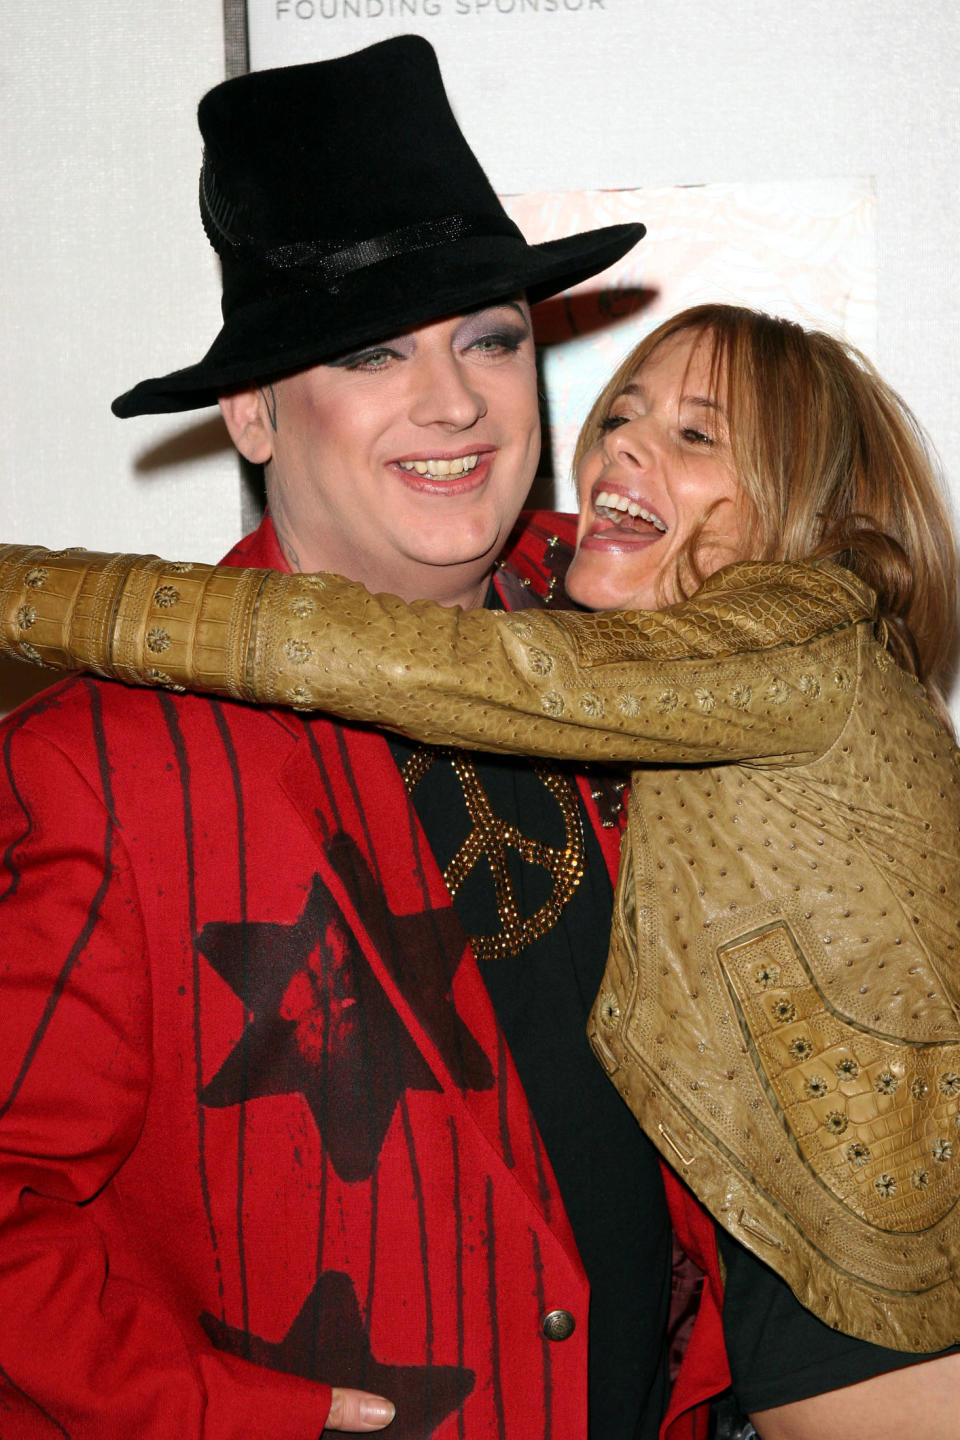 Rosanna Arquette (R) greets Boy George at the premiere of "All We Are Saying" at the Tribeca Film Festival in New York on April 22, 2005.